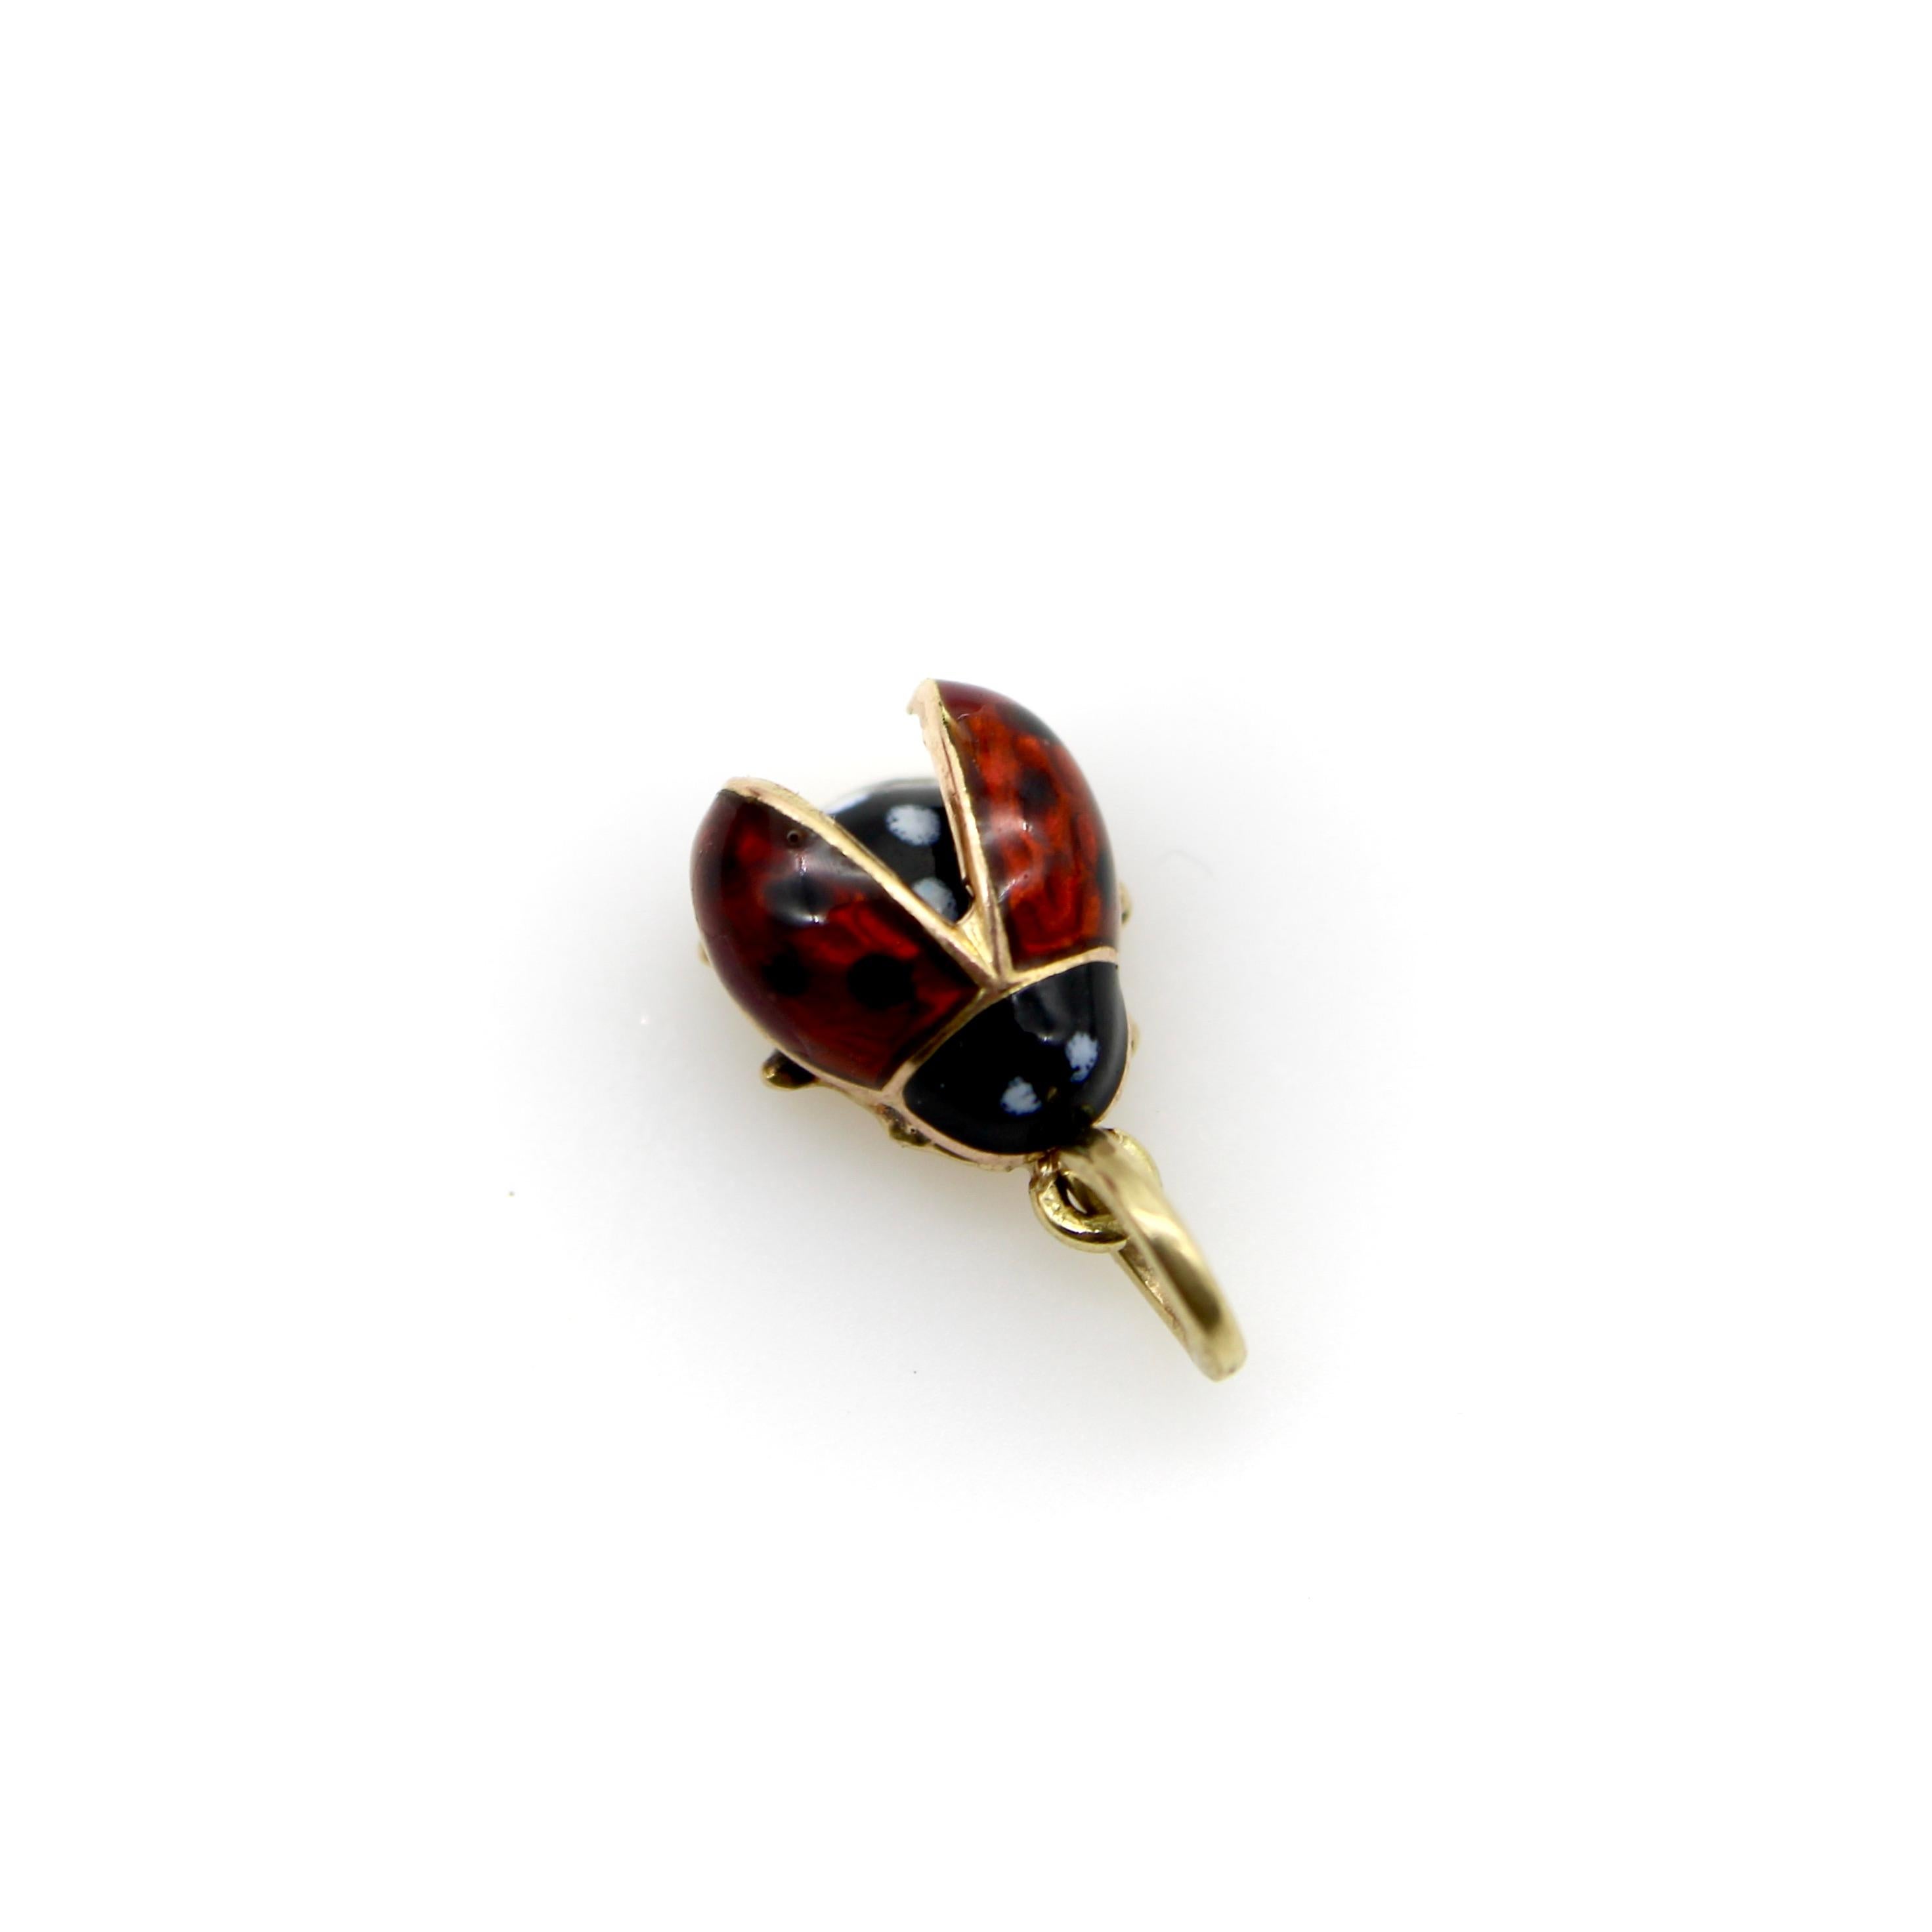 This 14k gold enamel ladybug charm is perched and ready to take off into flight. Its red enamel wings—dotted with adorable black spots—are lifted to reveal its black and white polka dotted body. The black enamel head has two tiny white eyes that